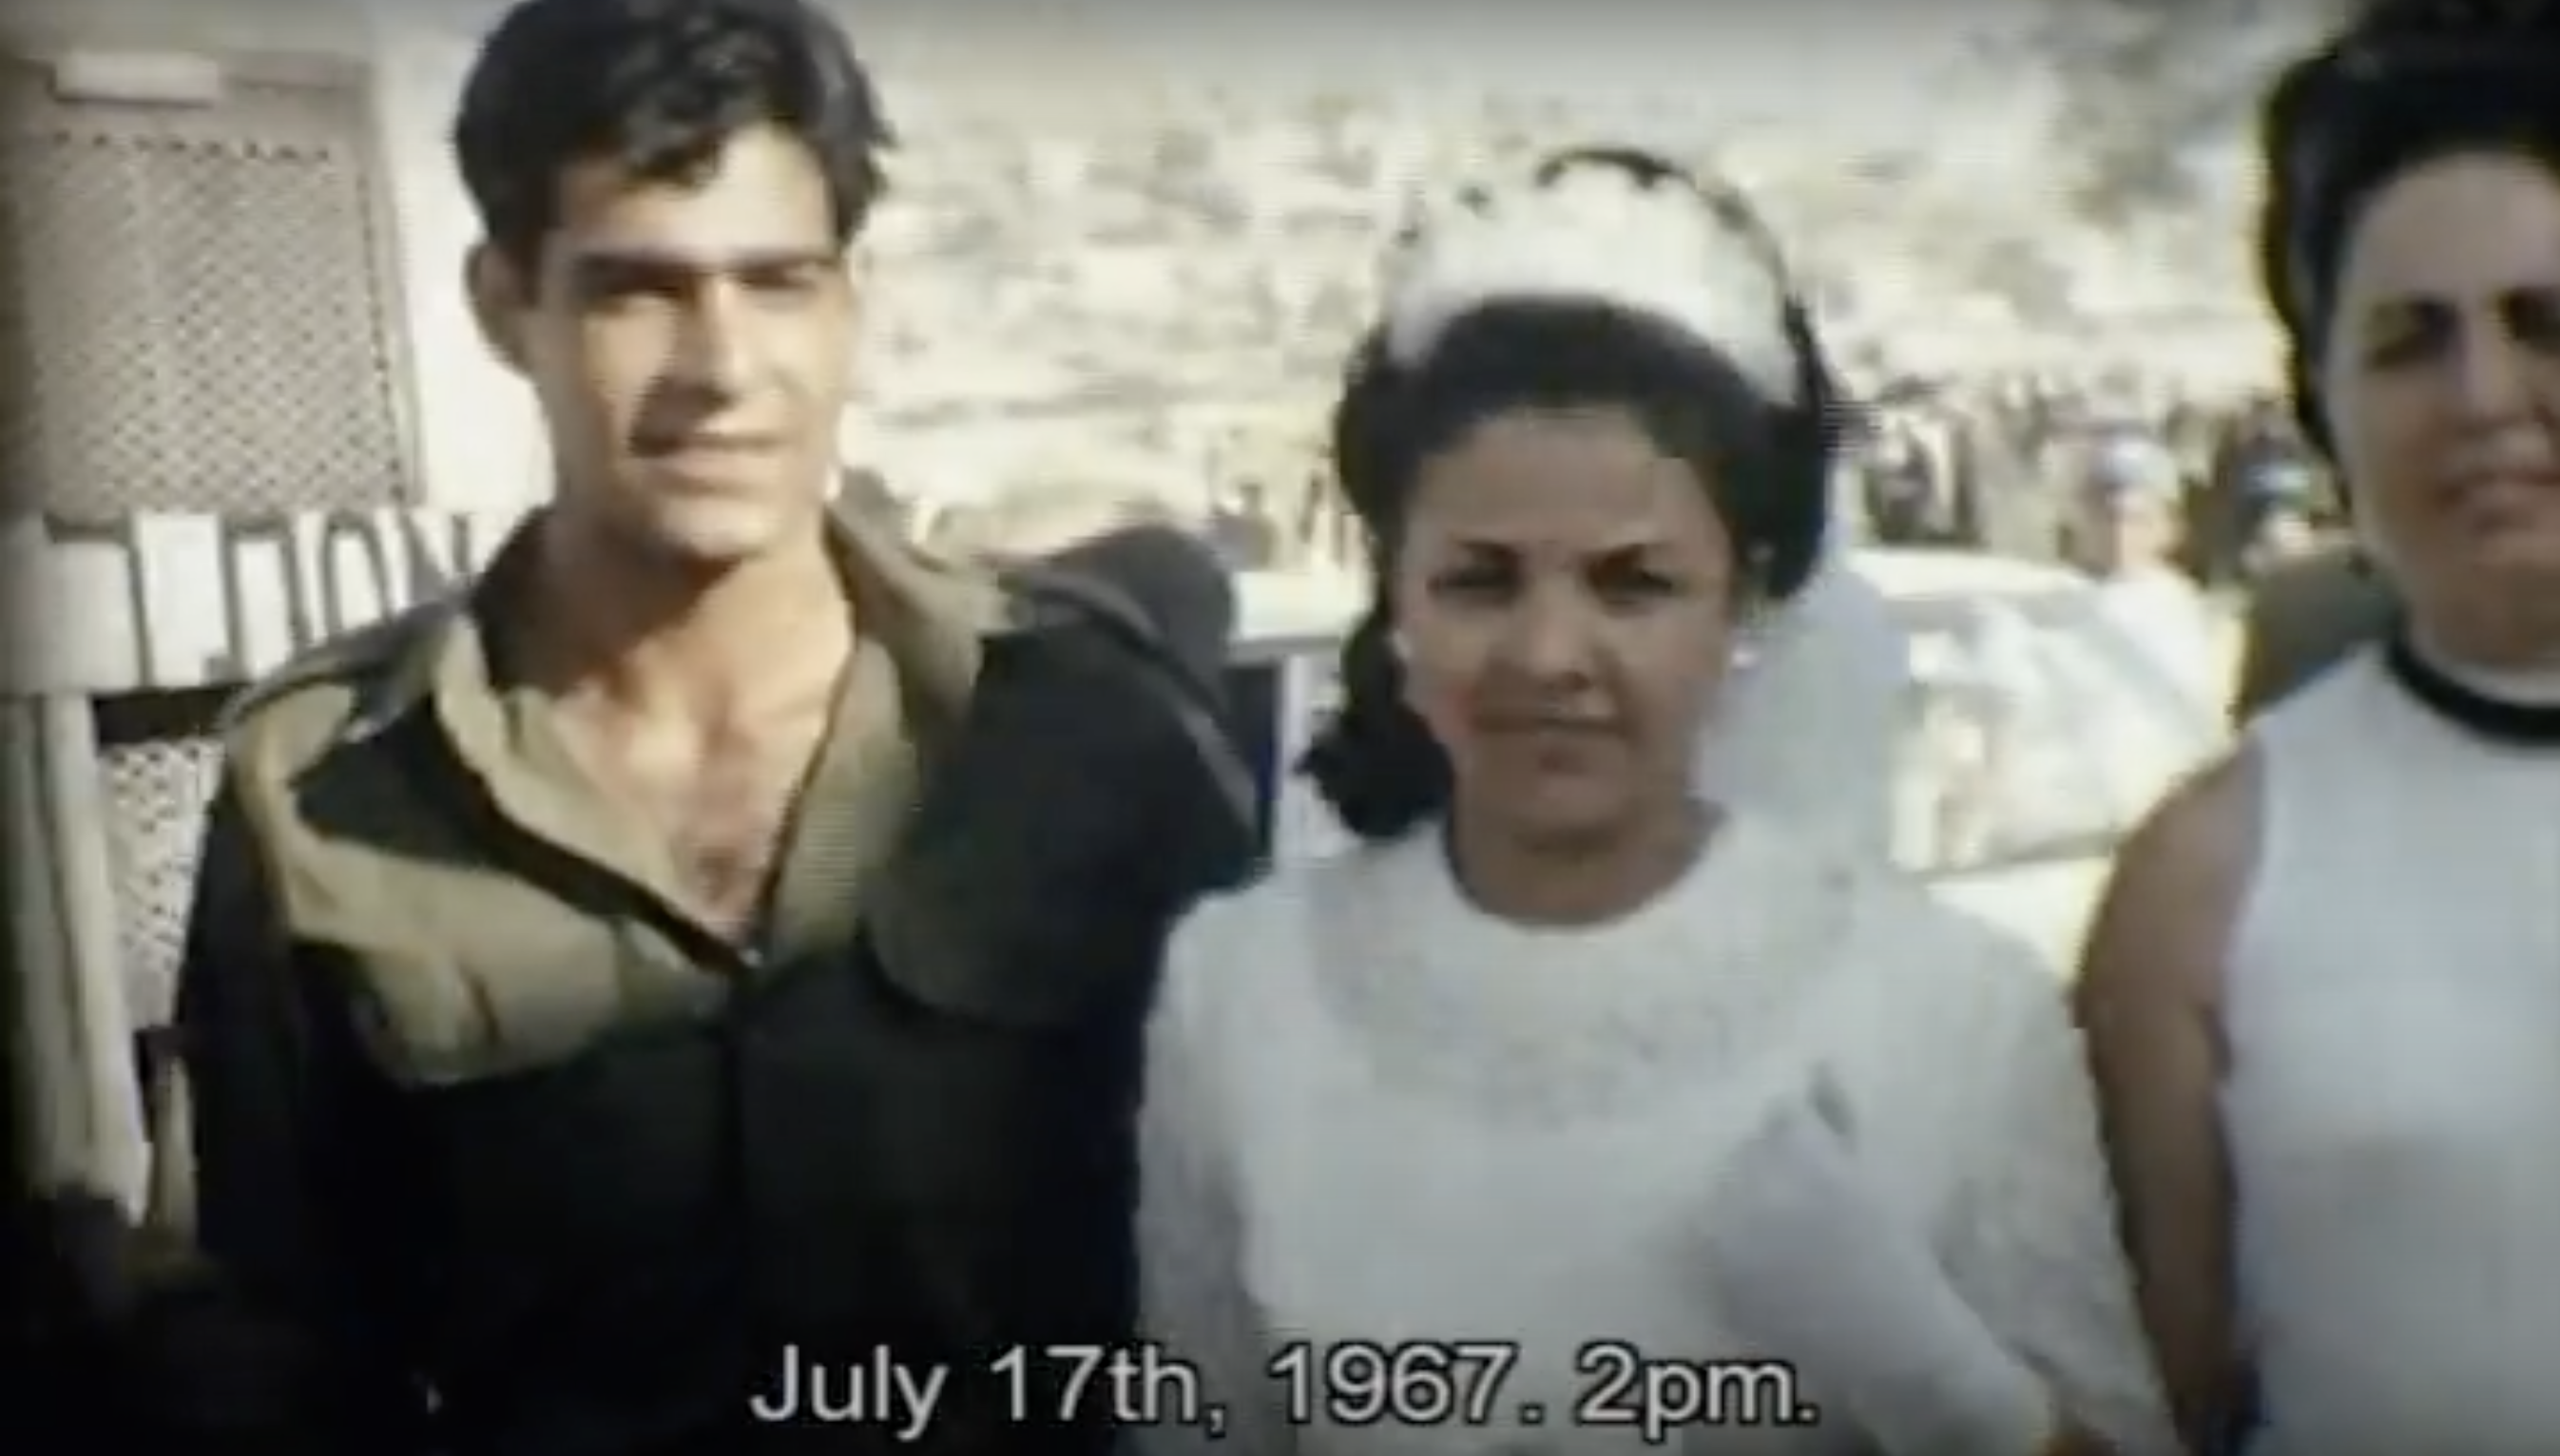 Israel's History In A Home Movie